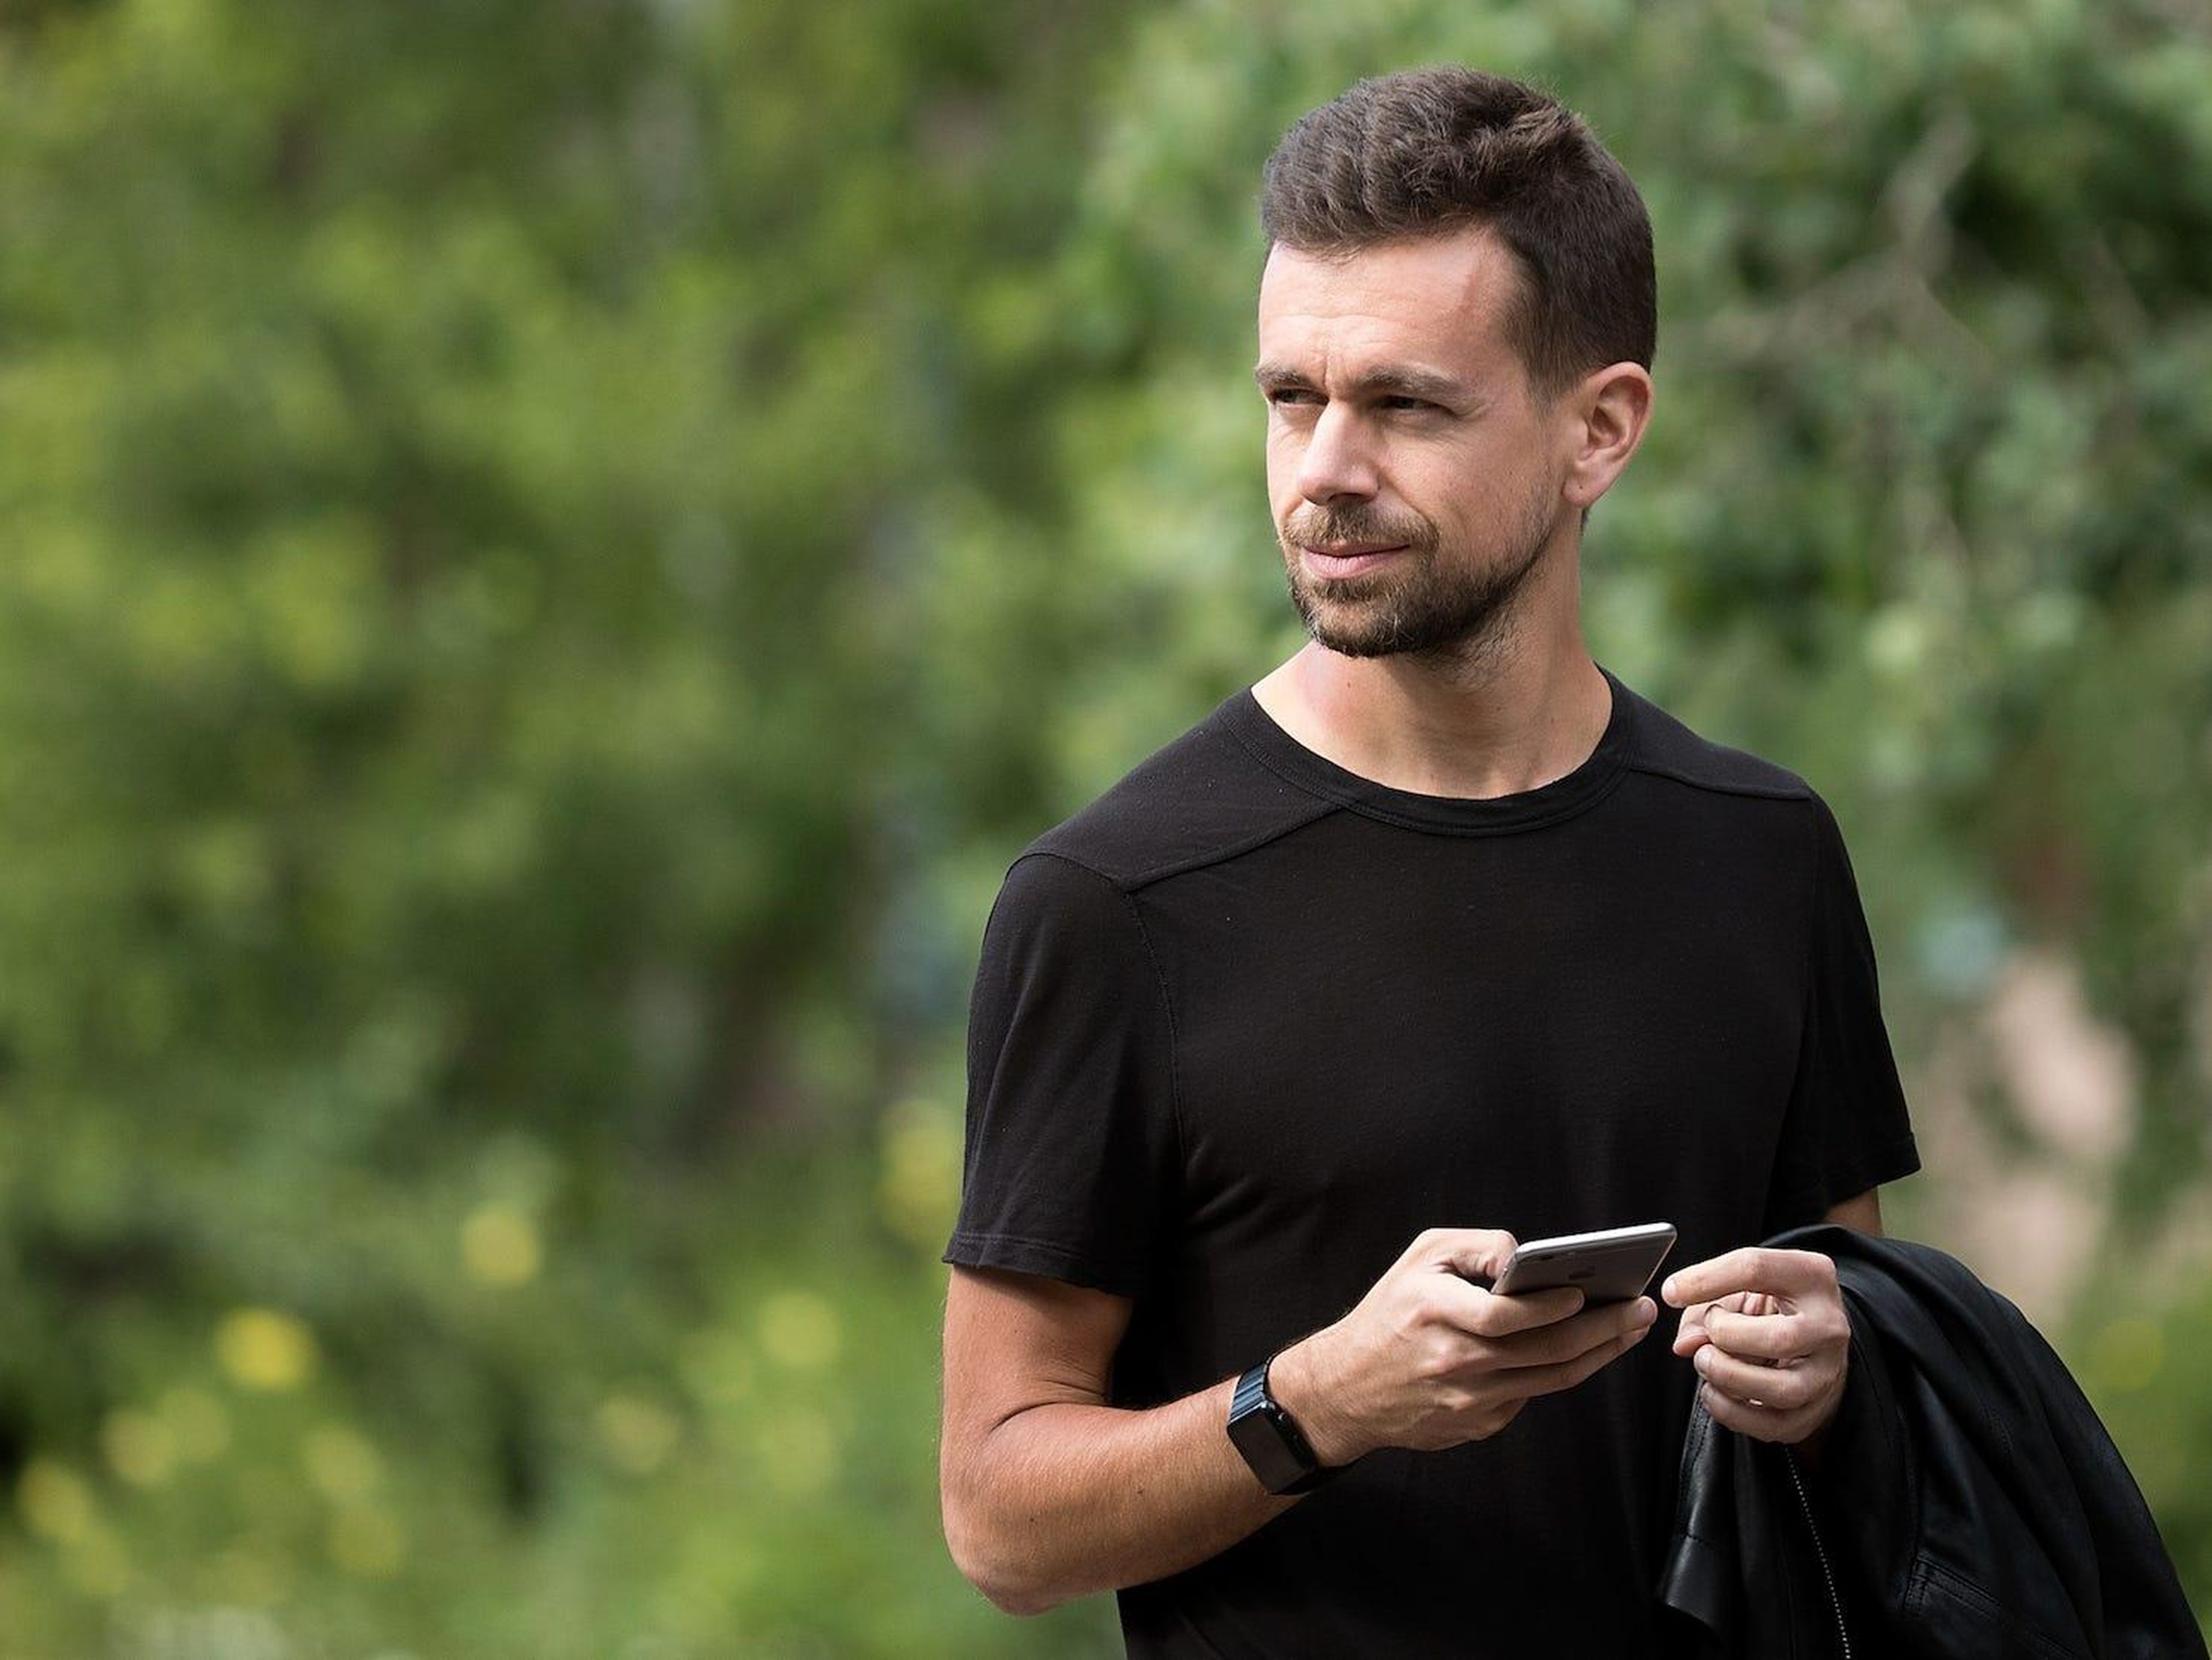 However, Dorsey's diet has caused some concern from people on the internet. Users on Dorsey's platform, Twitter, have said his fasting diet sounds more like an eating disorder.